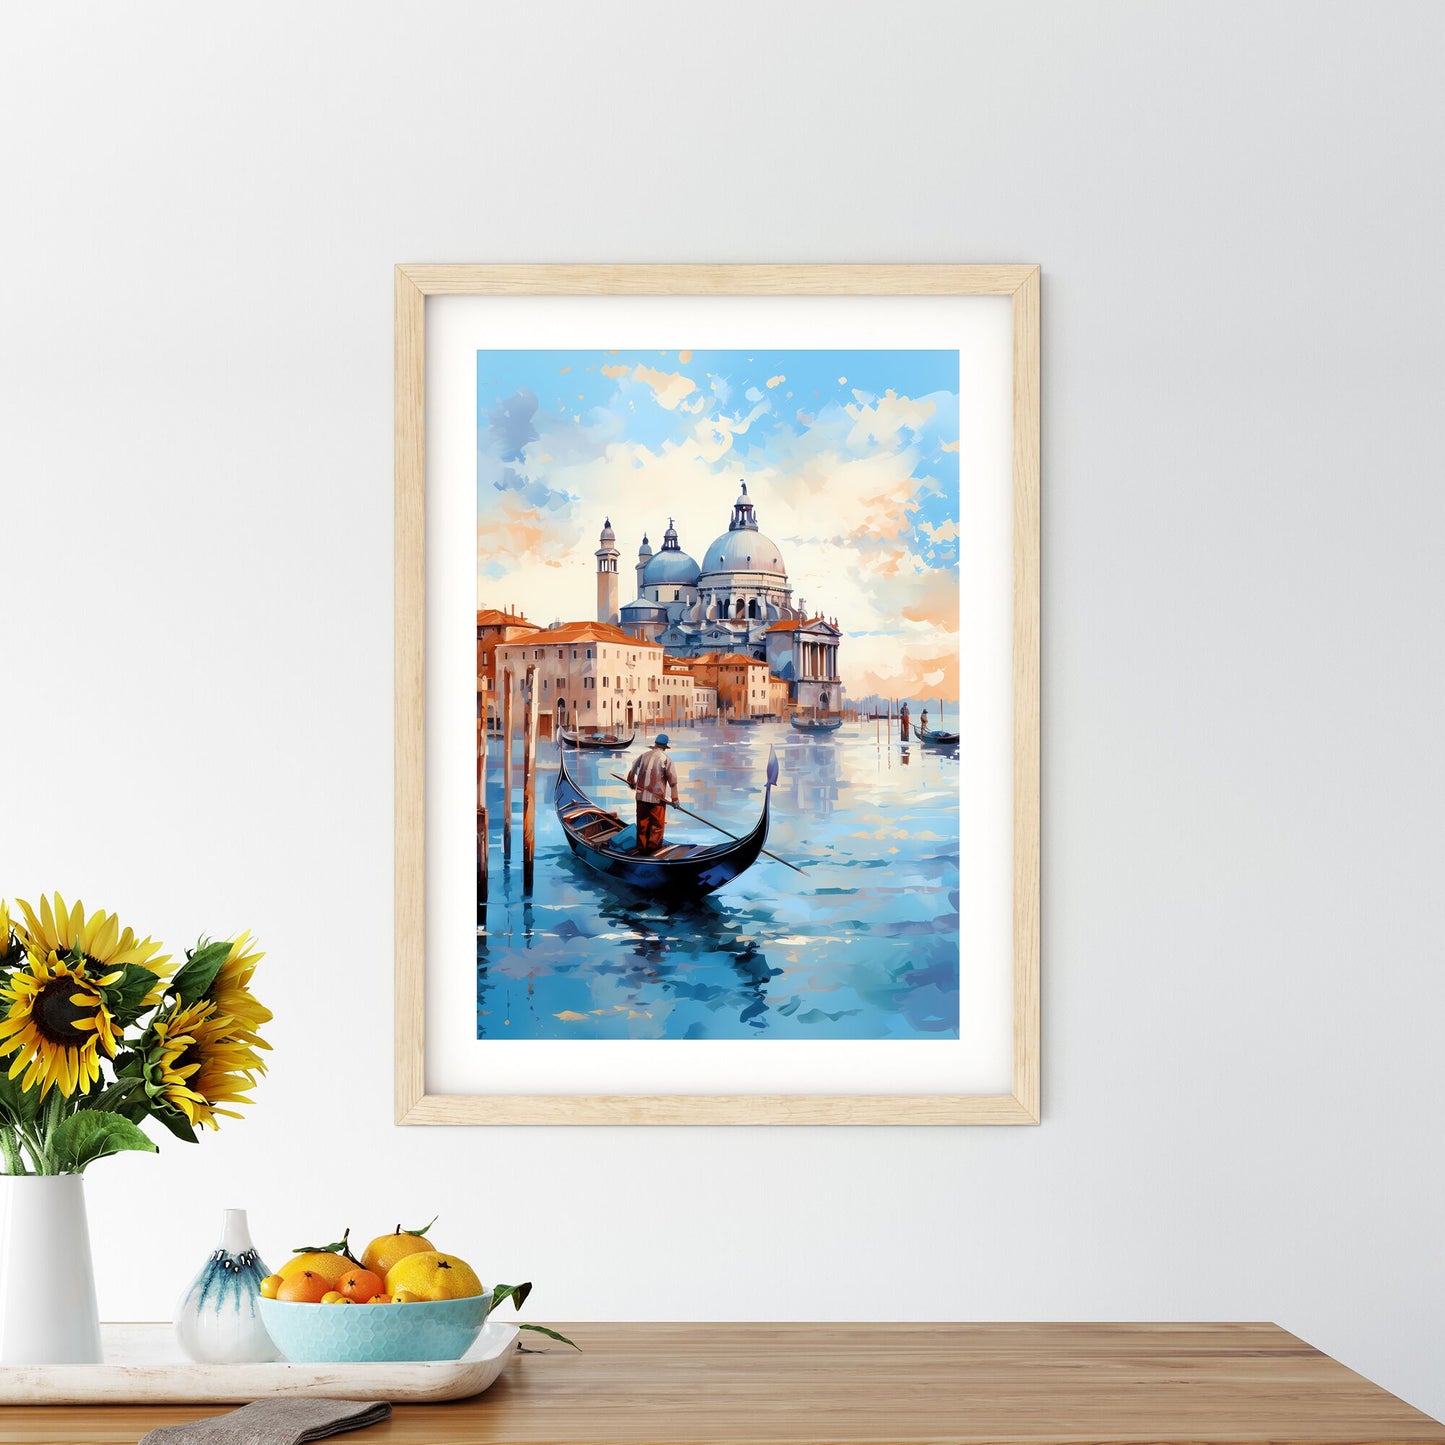 Painting Of A Gondola In A Body Of Water With A Building In The Background Art Print Default Title